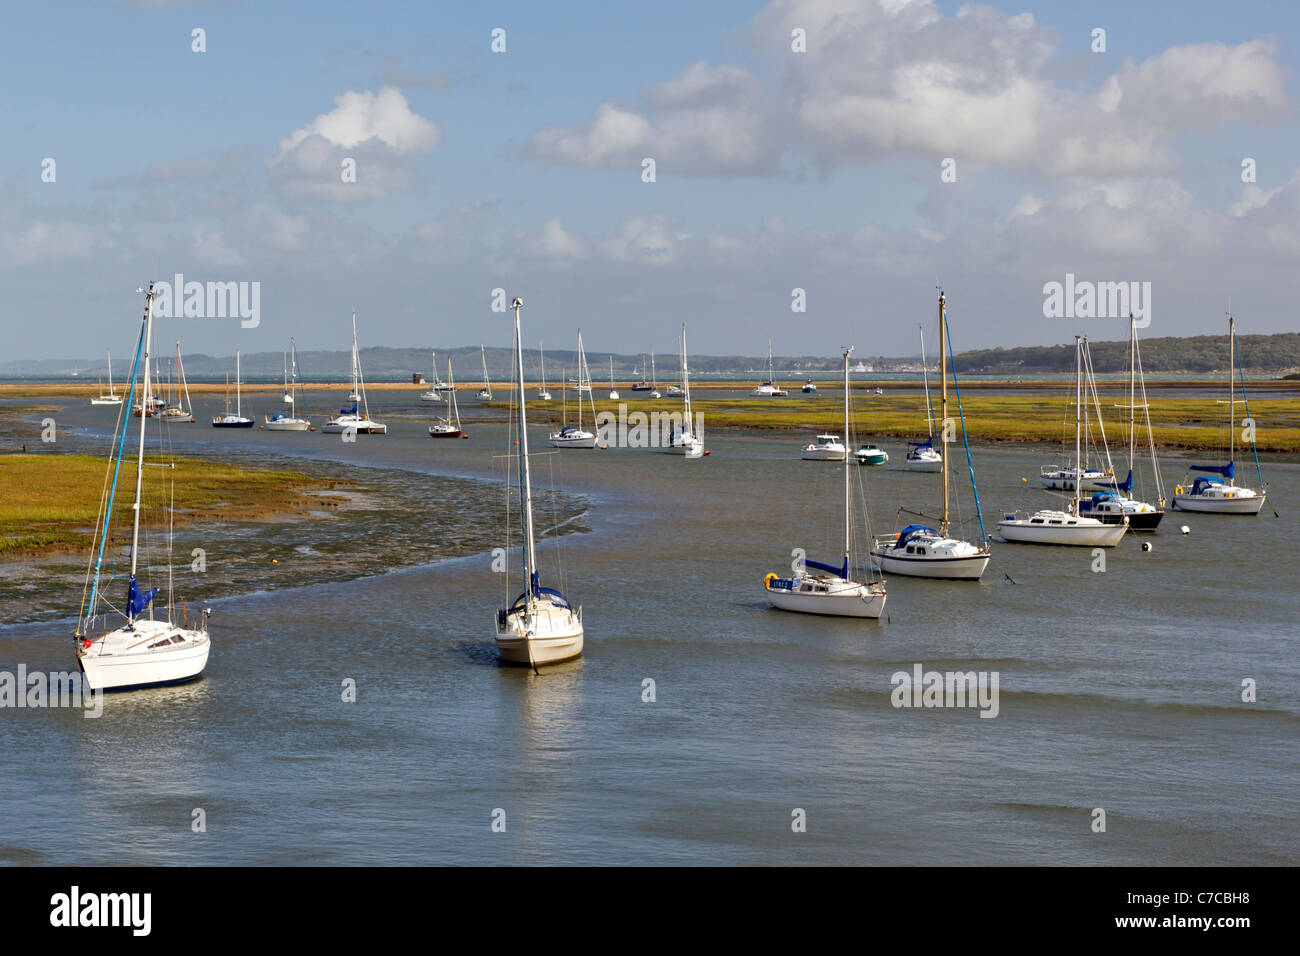 S-shape view of Moored Yachts and Boats in tidal estuary at Hurst Castle Spit near Keyhaven Yacht Club, Milford On Sea Stock Photo